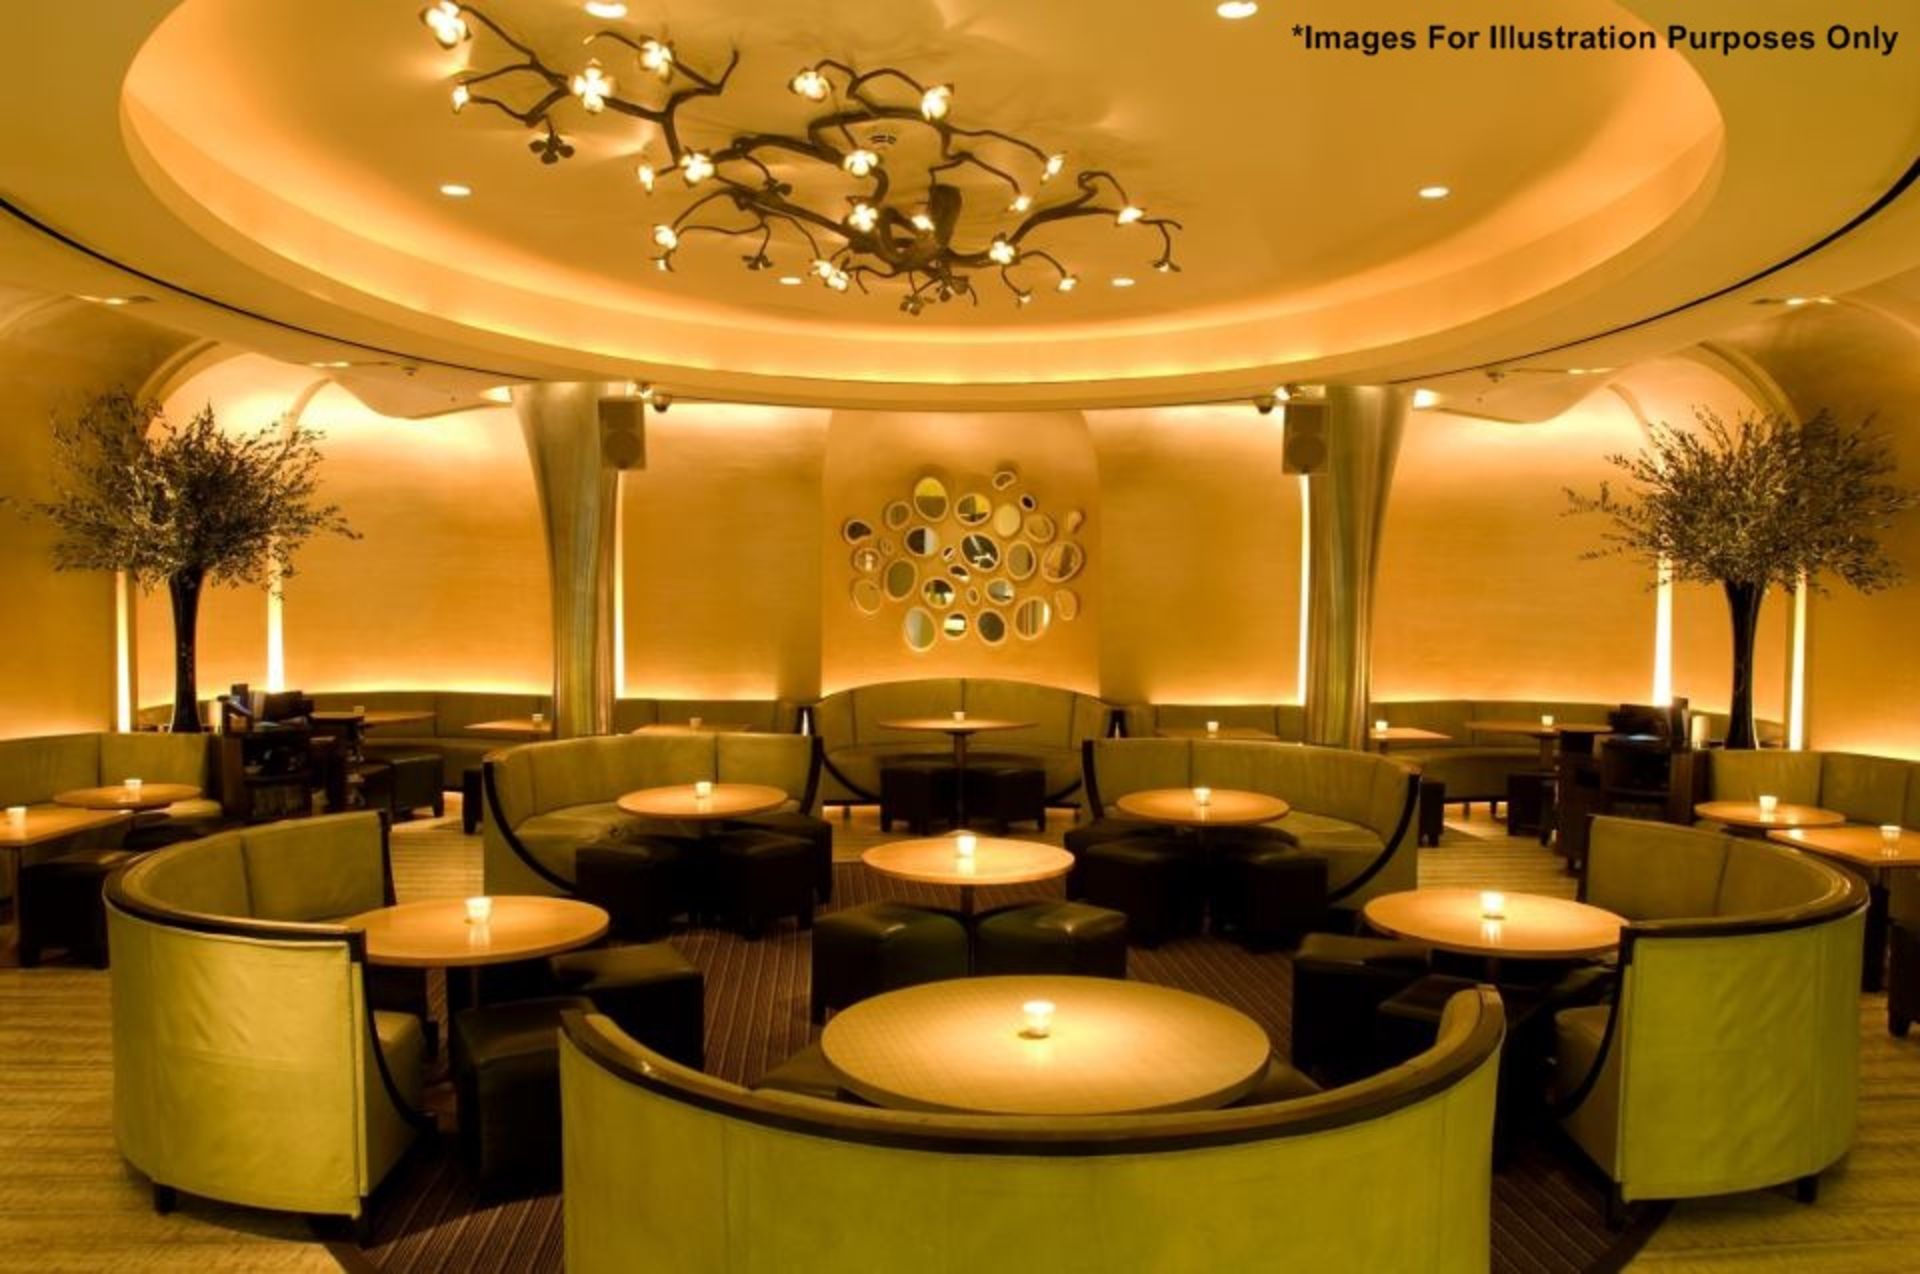 1 x Luxury Upholstered Curved Seating Area - Recently Removed From Nobu - Dimensions: W285 x D62cm x - Image 16 of 23